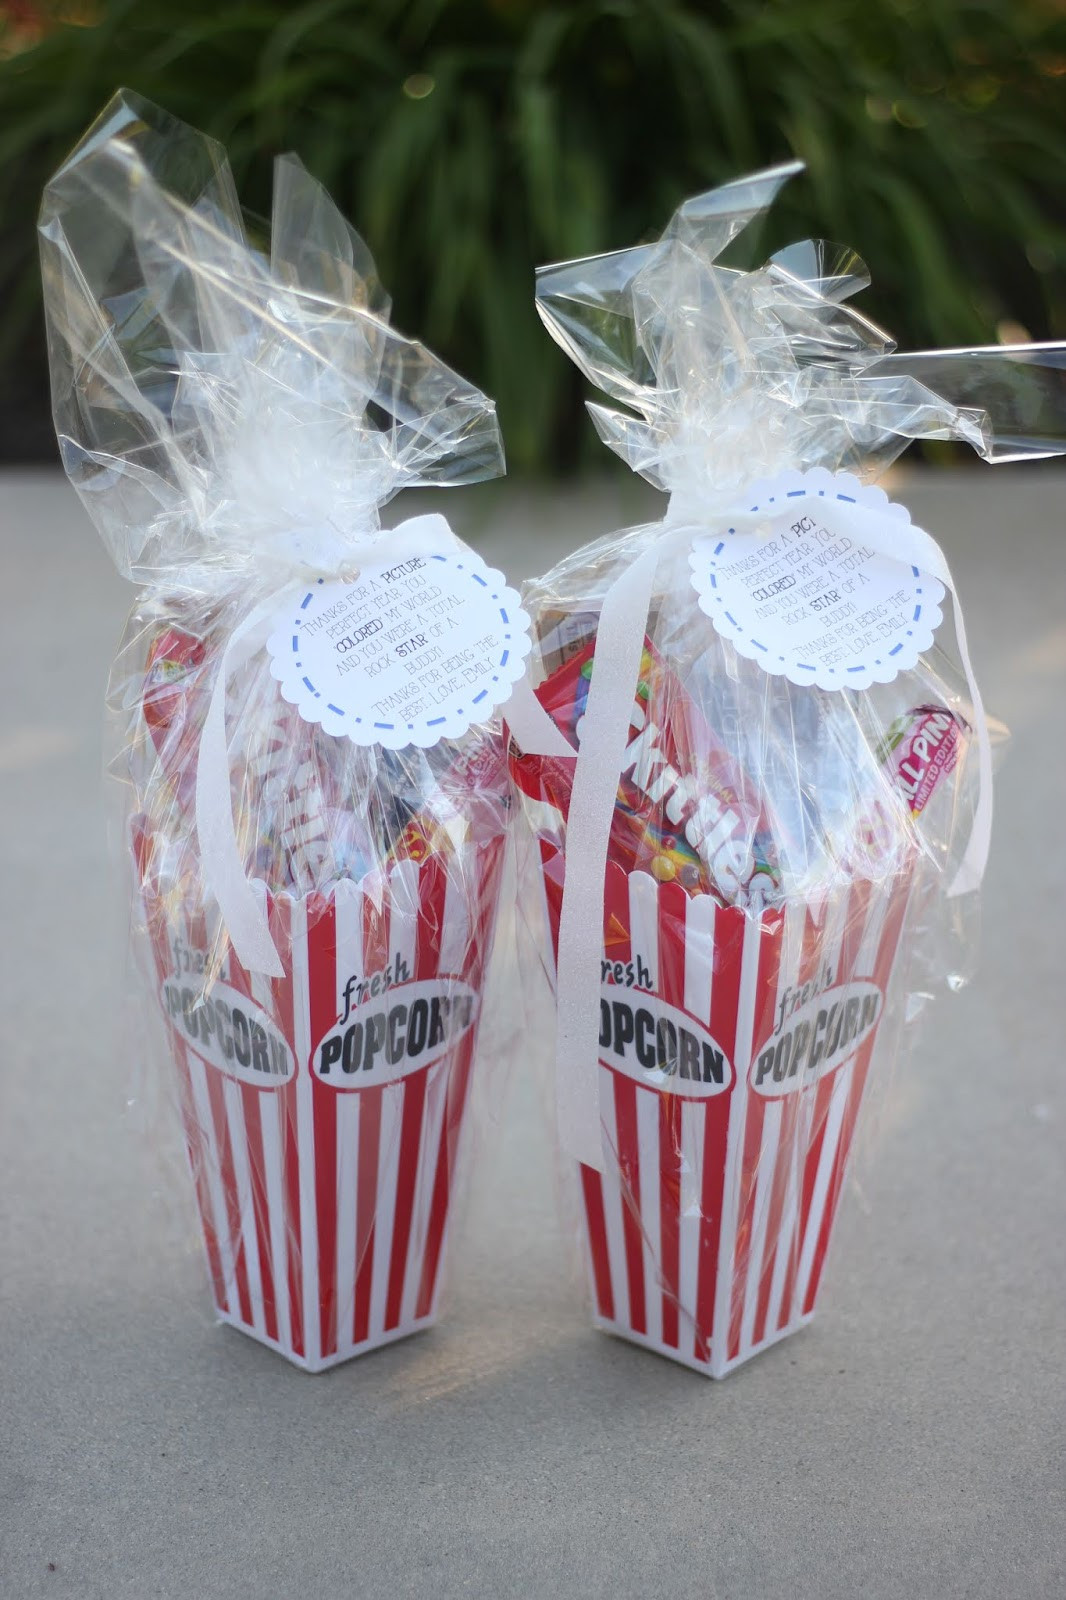 Movie Ticket Gift Basket Ideas
 The Real Housewife of Fresno End of Year Gift Ideas